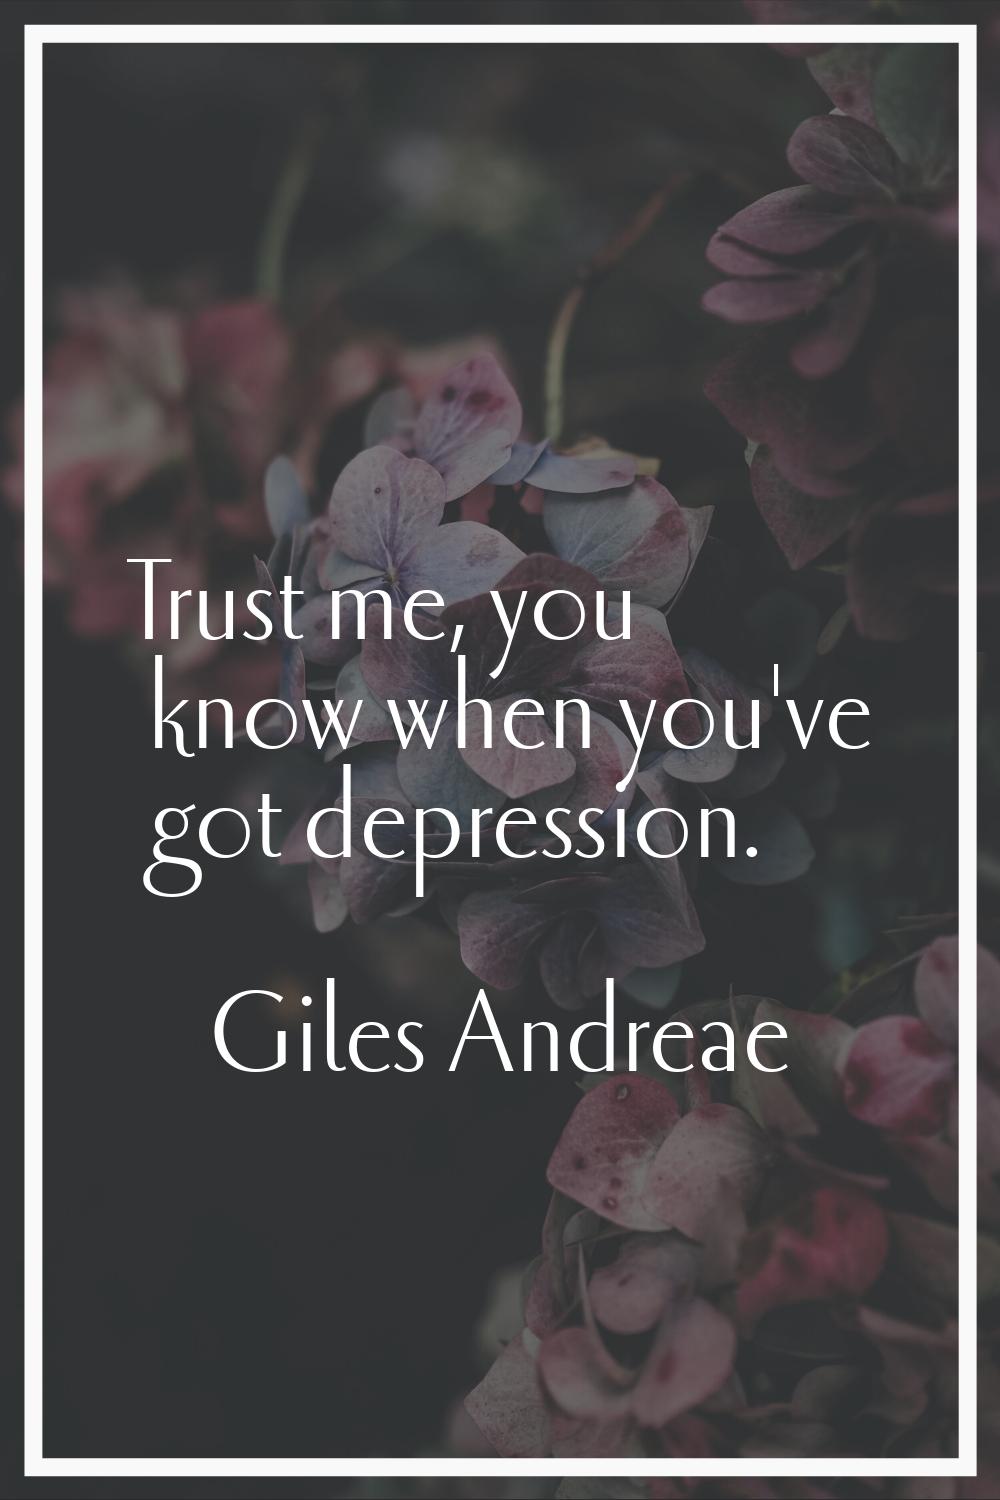 Trust me, you know when you've got depression.